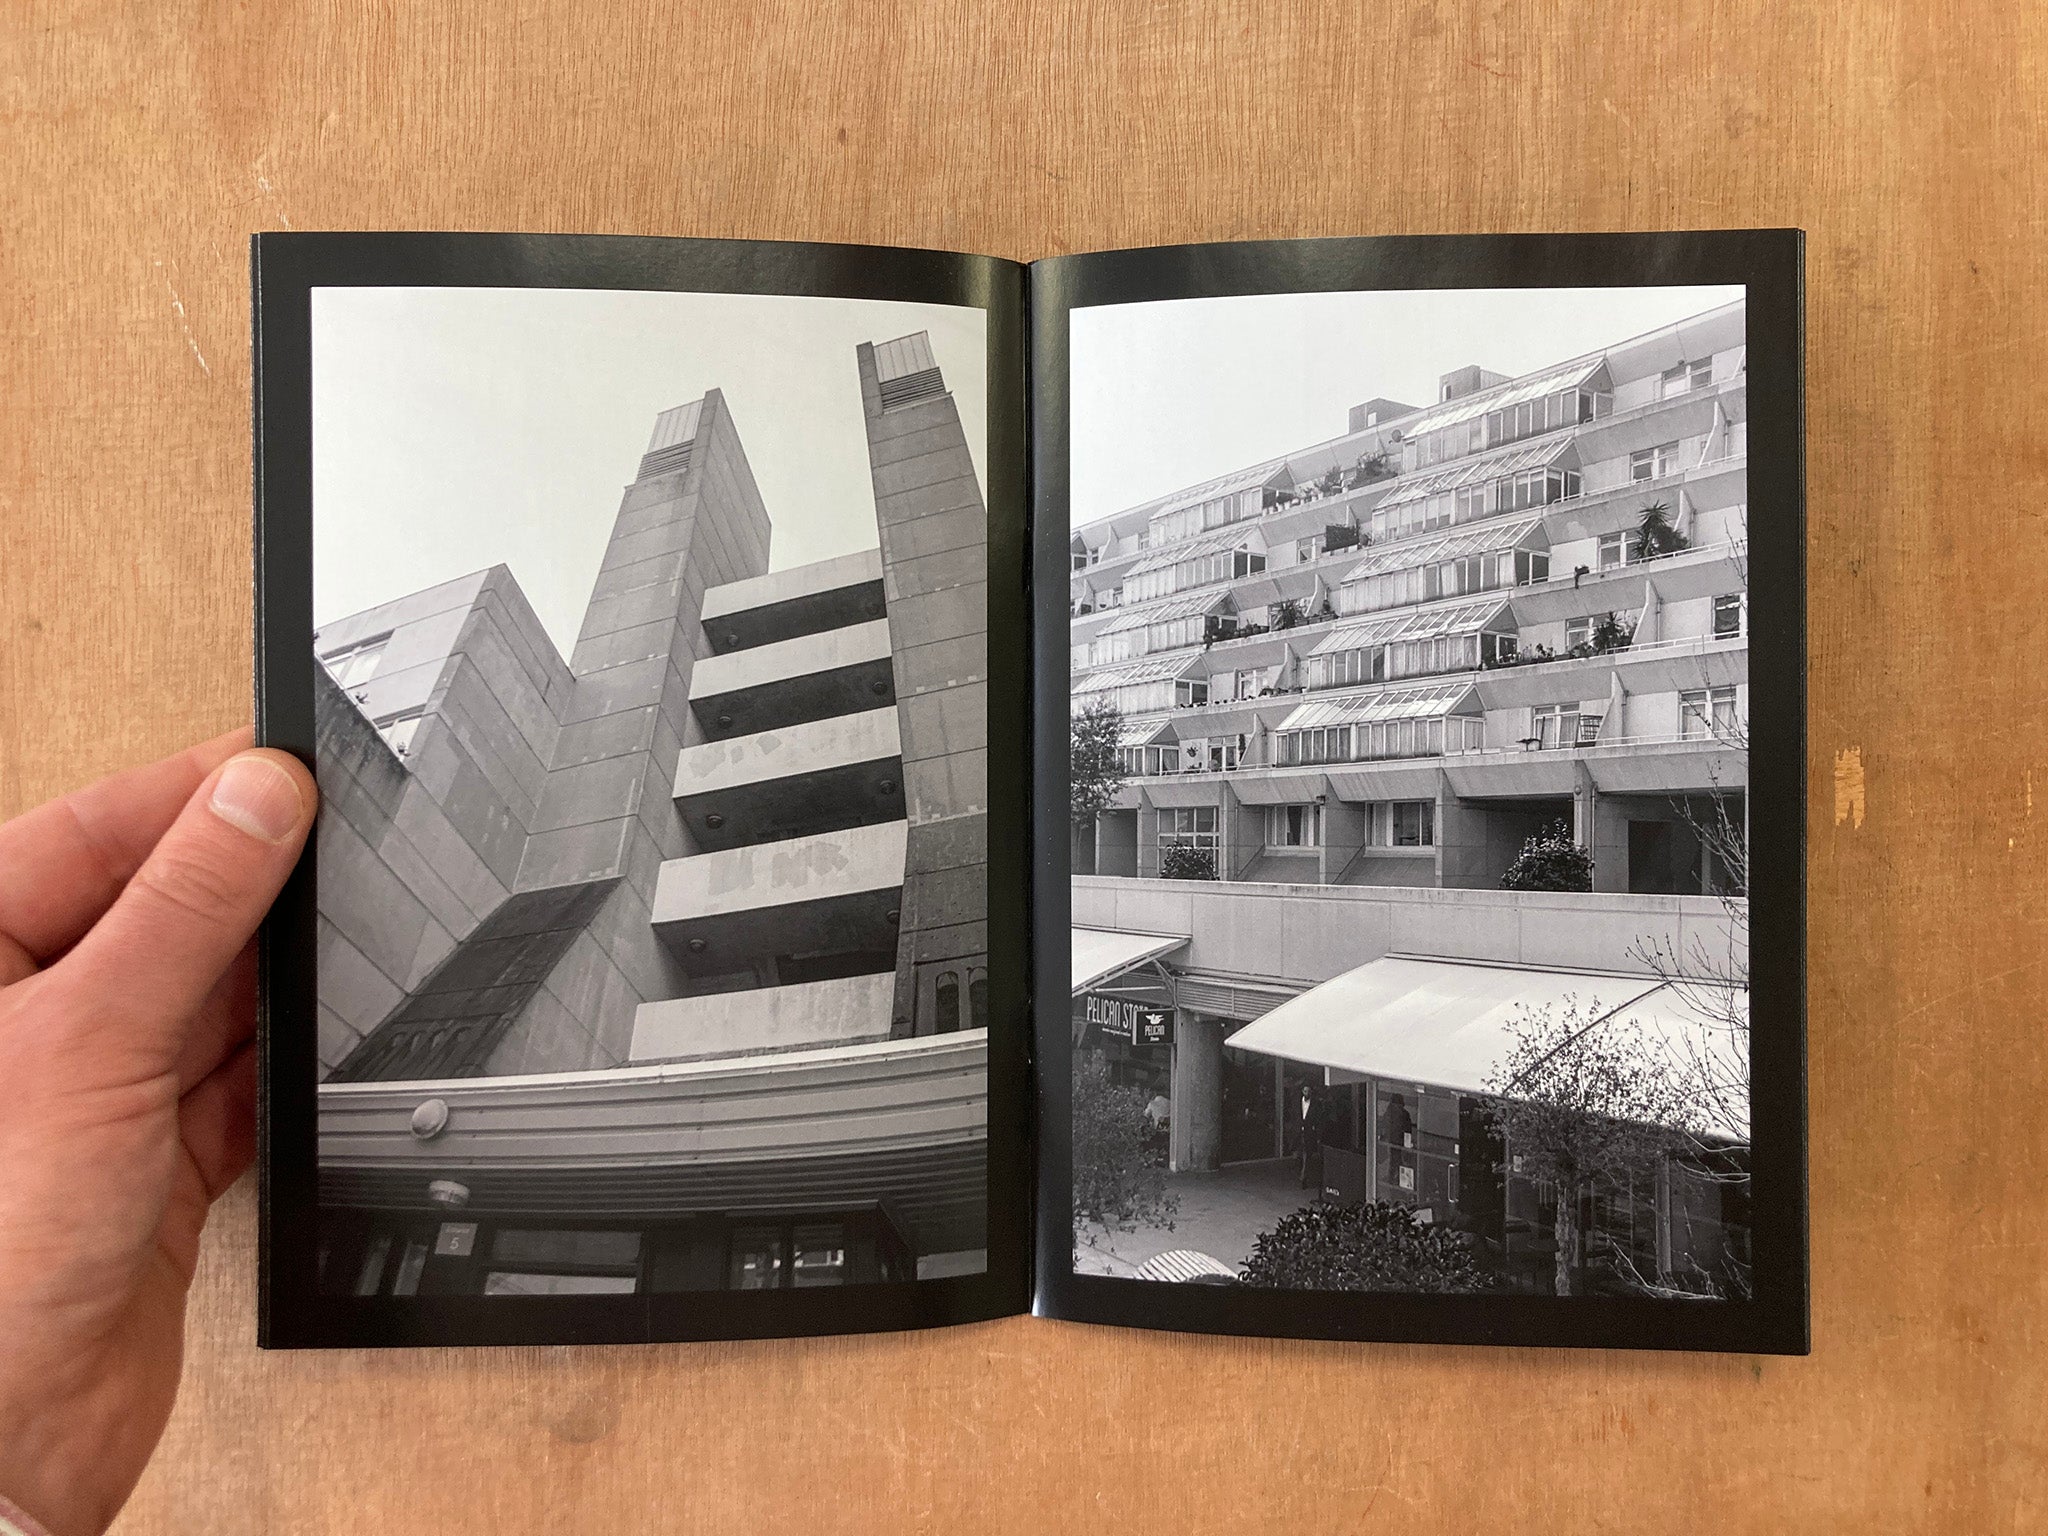 THE BRUNSWICK CENTRE: WHERE COMMUNITY, DESIGN AND INNOVATION MEET by Stephanos Habeshis